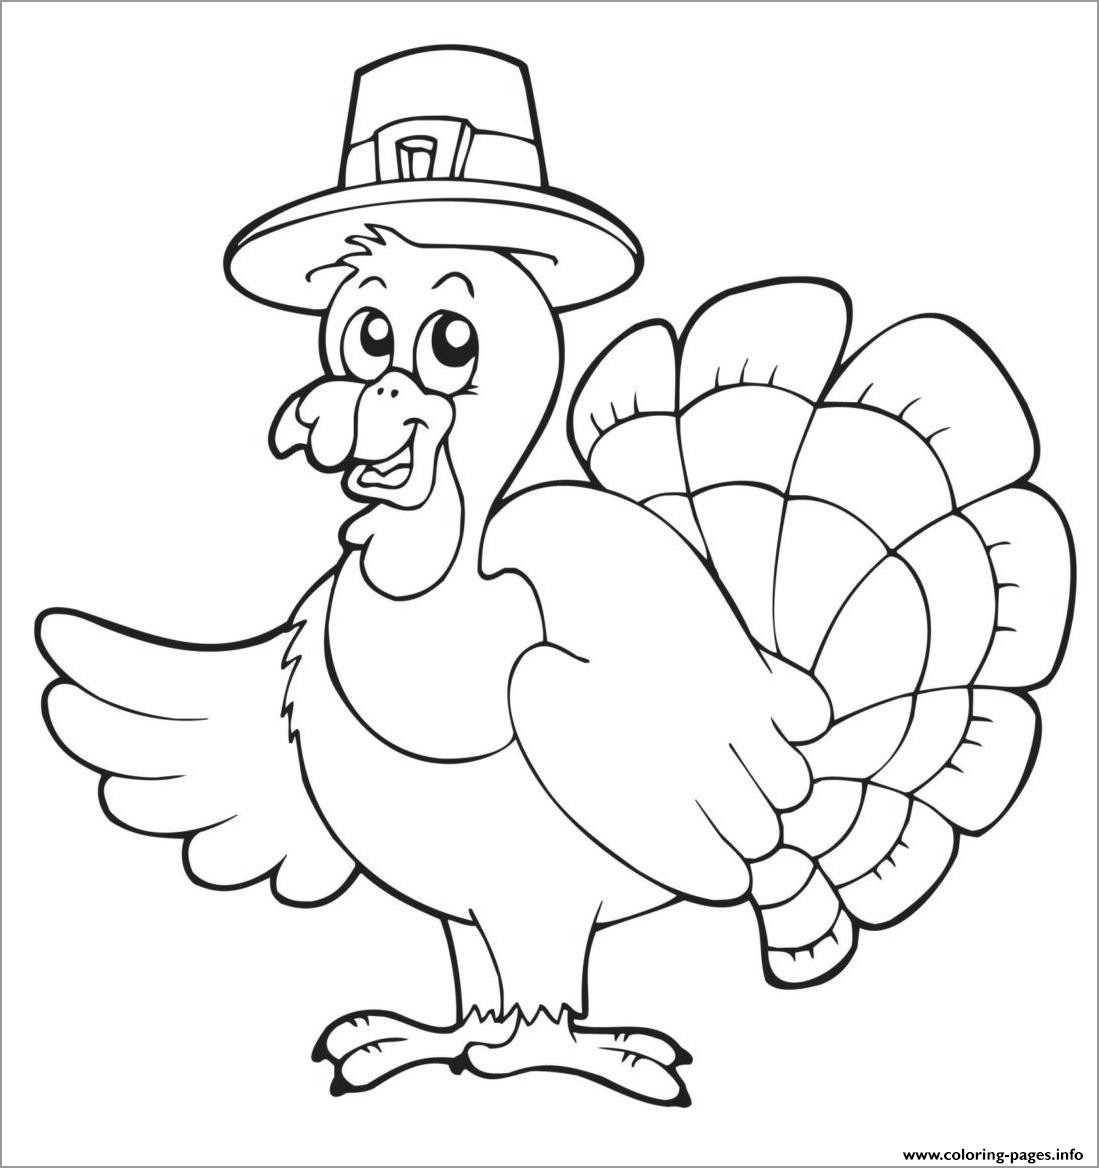 Easy Turkey Coloring Pages for Kids - ColoringBay